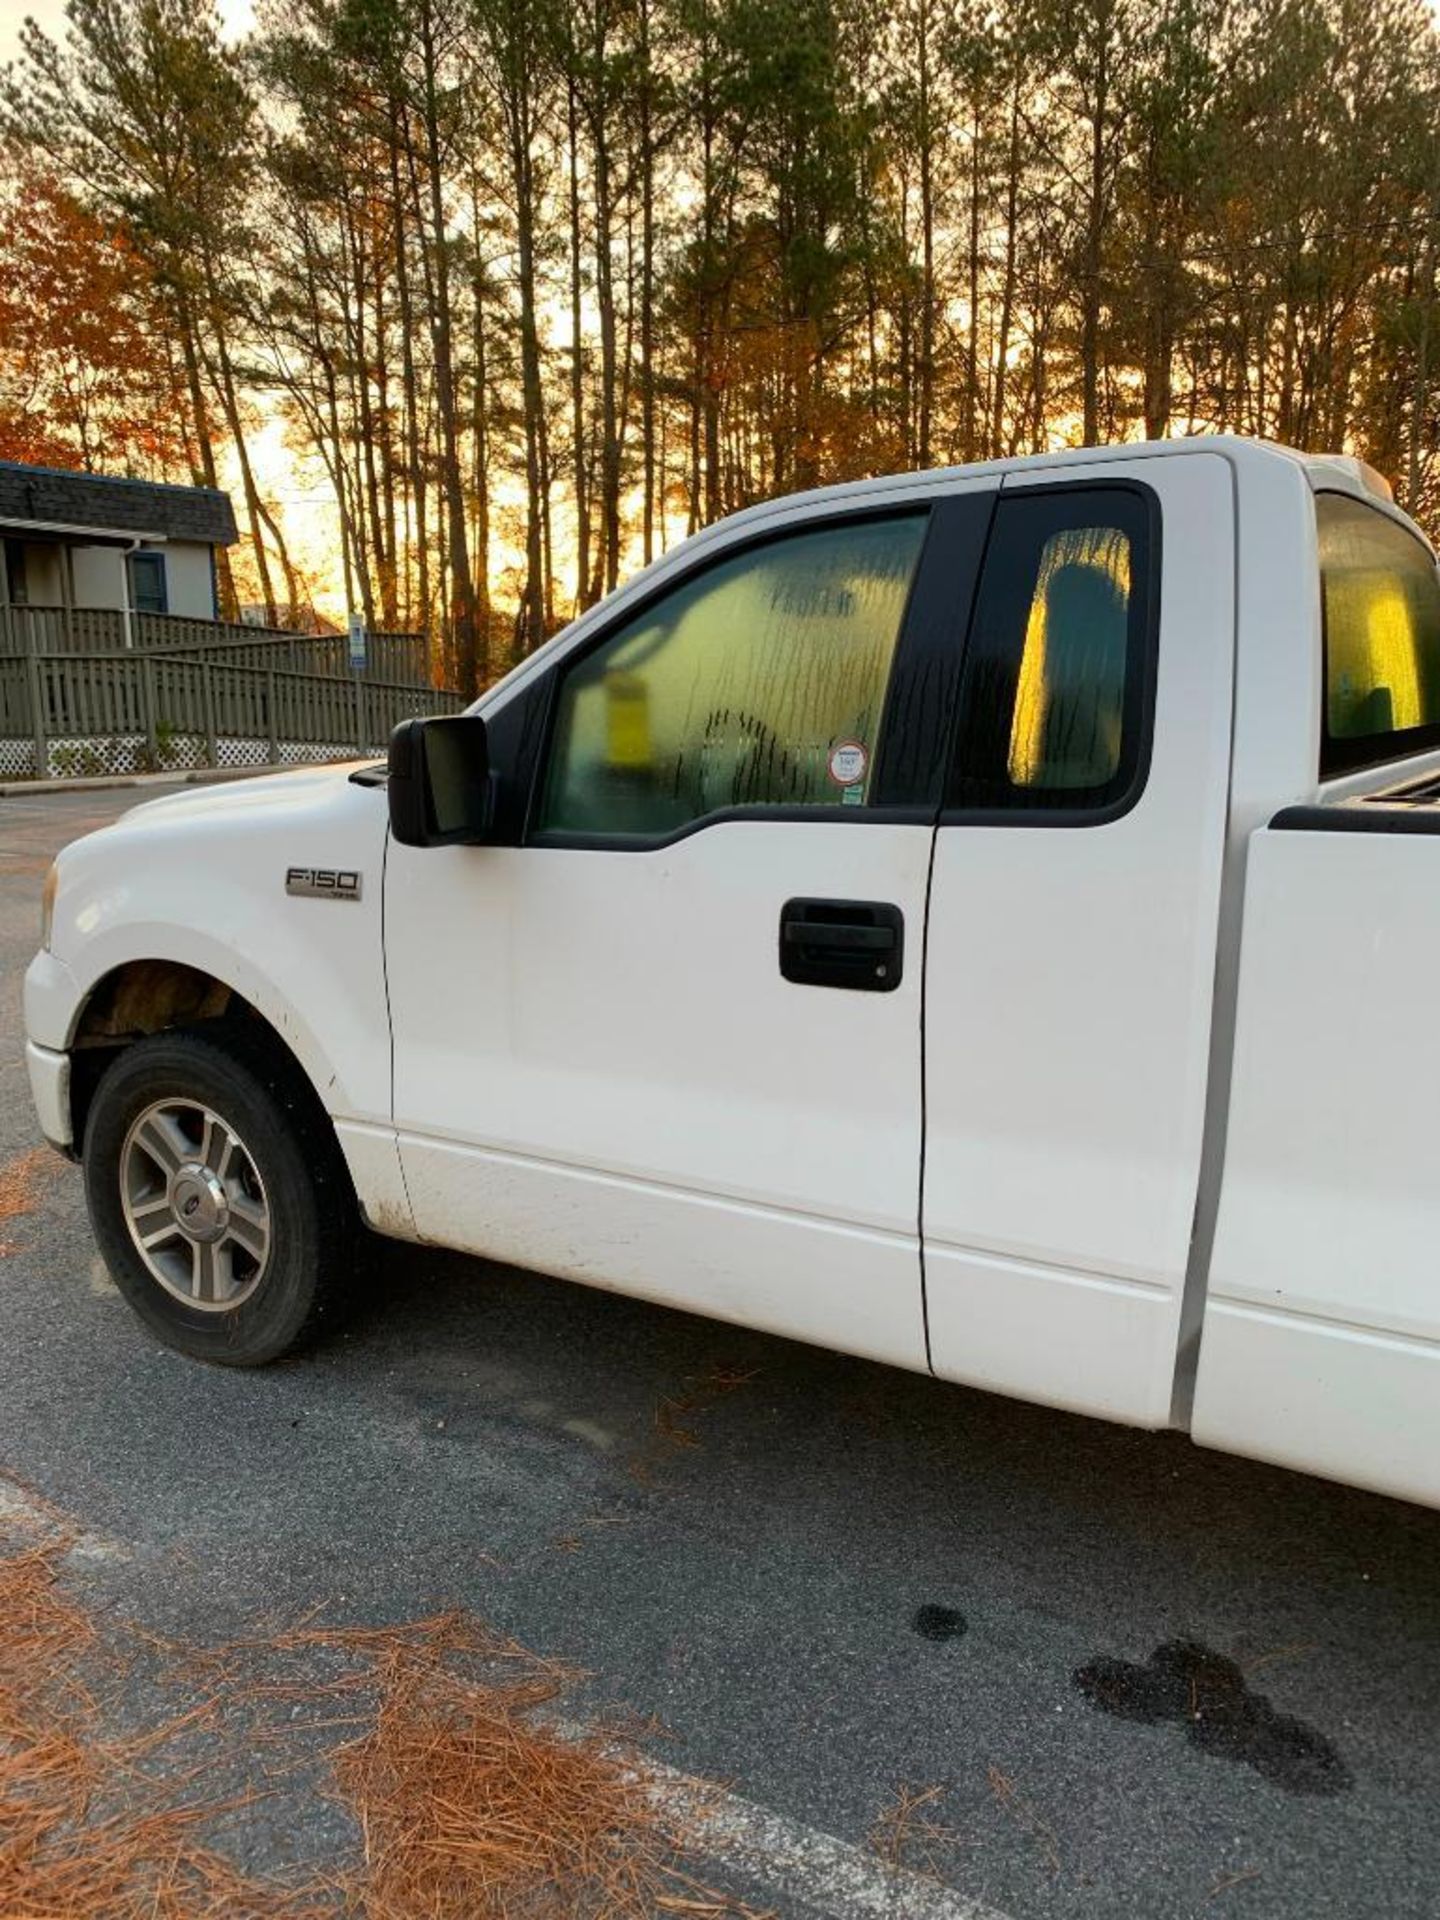 2008 FORD F-150 STX PICK-UP TRUCK, STANDARD CAB, AUTOMATIC TRANSMISSION, 2-WHEEL DRIVE, 70,003 MILES - Image 6 of 9